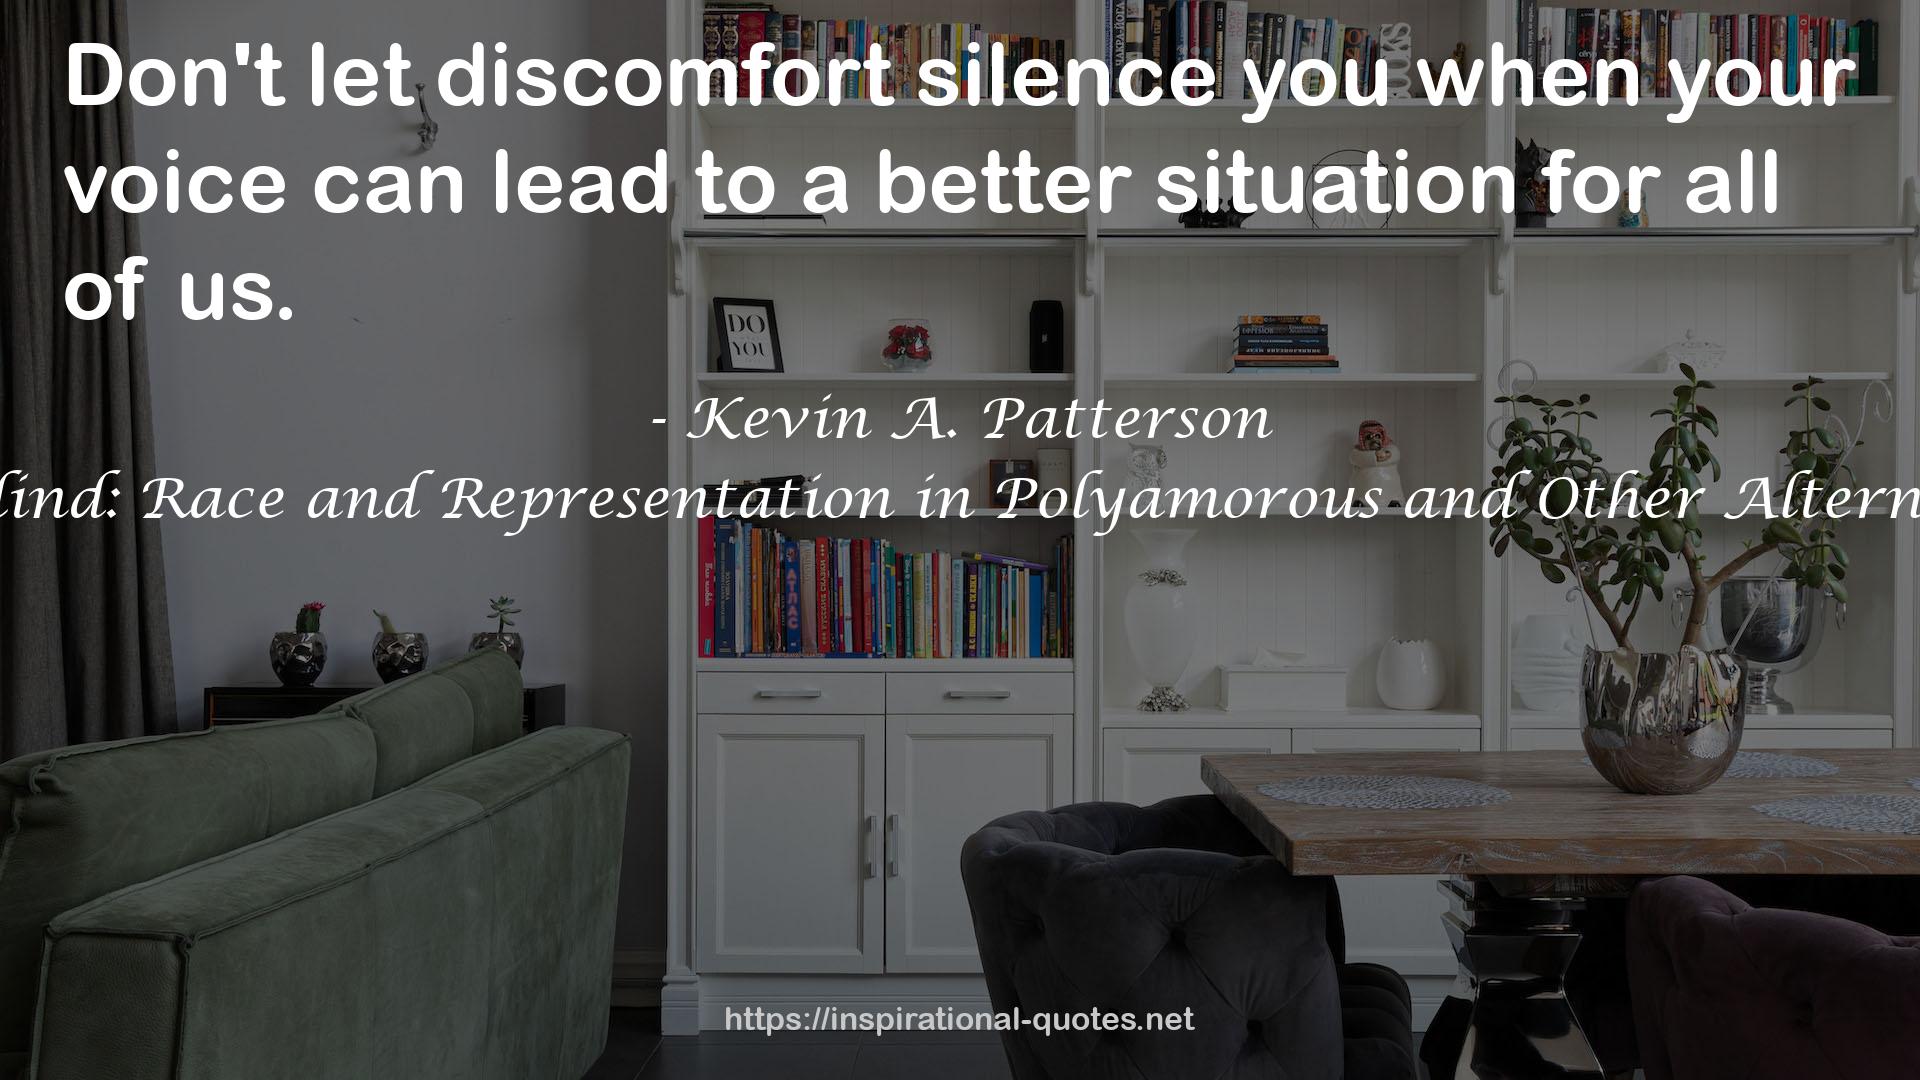 Kevin A. Patterson QUOTES